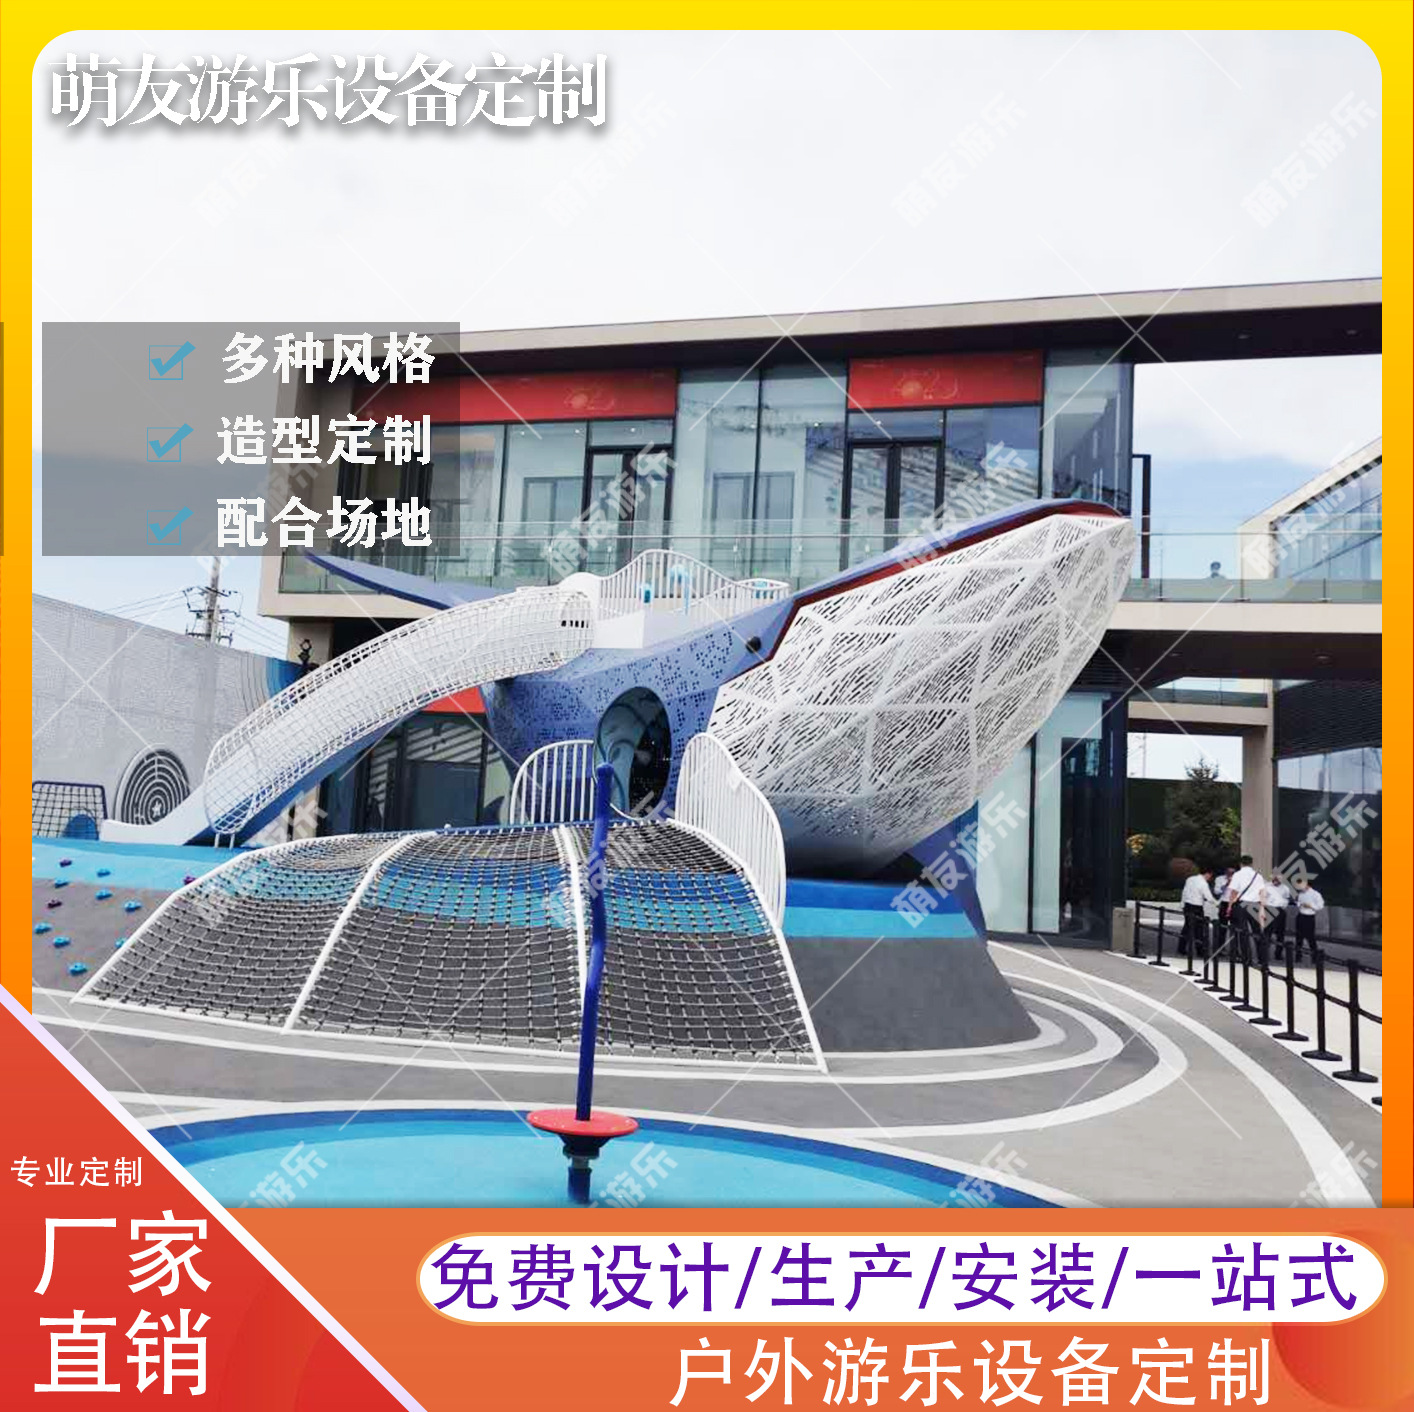 stainless steel whale Slide modelling Climbing combination originality engineering project equipment large Facility outdoor Playground